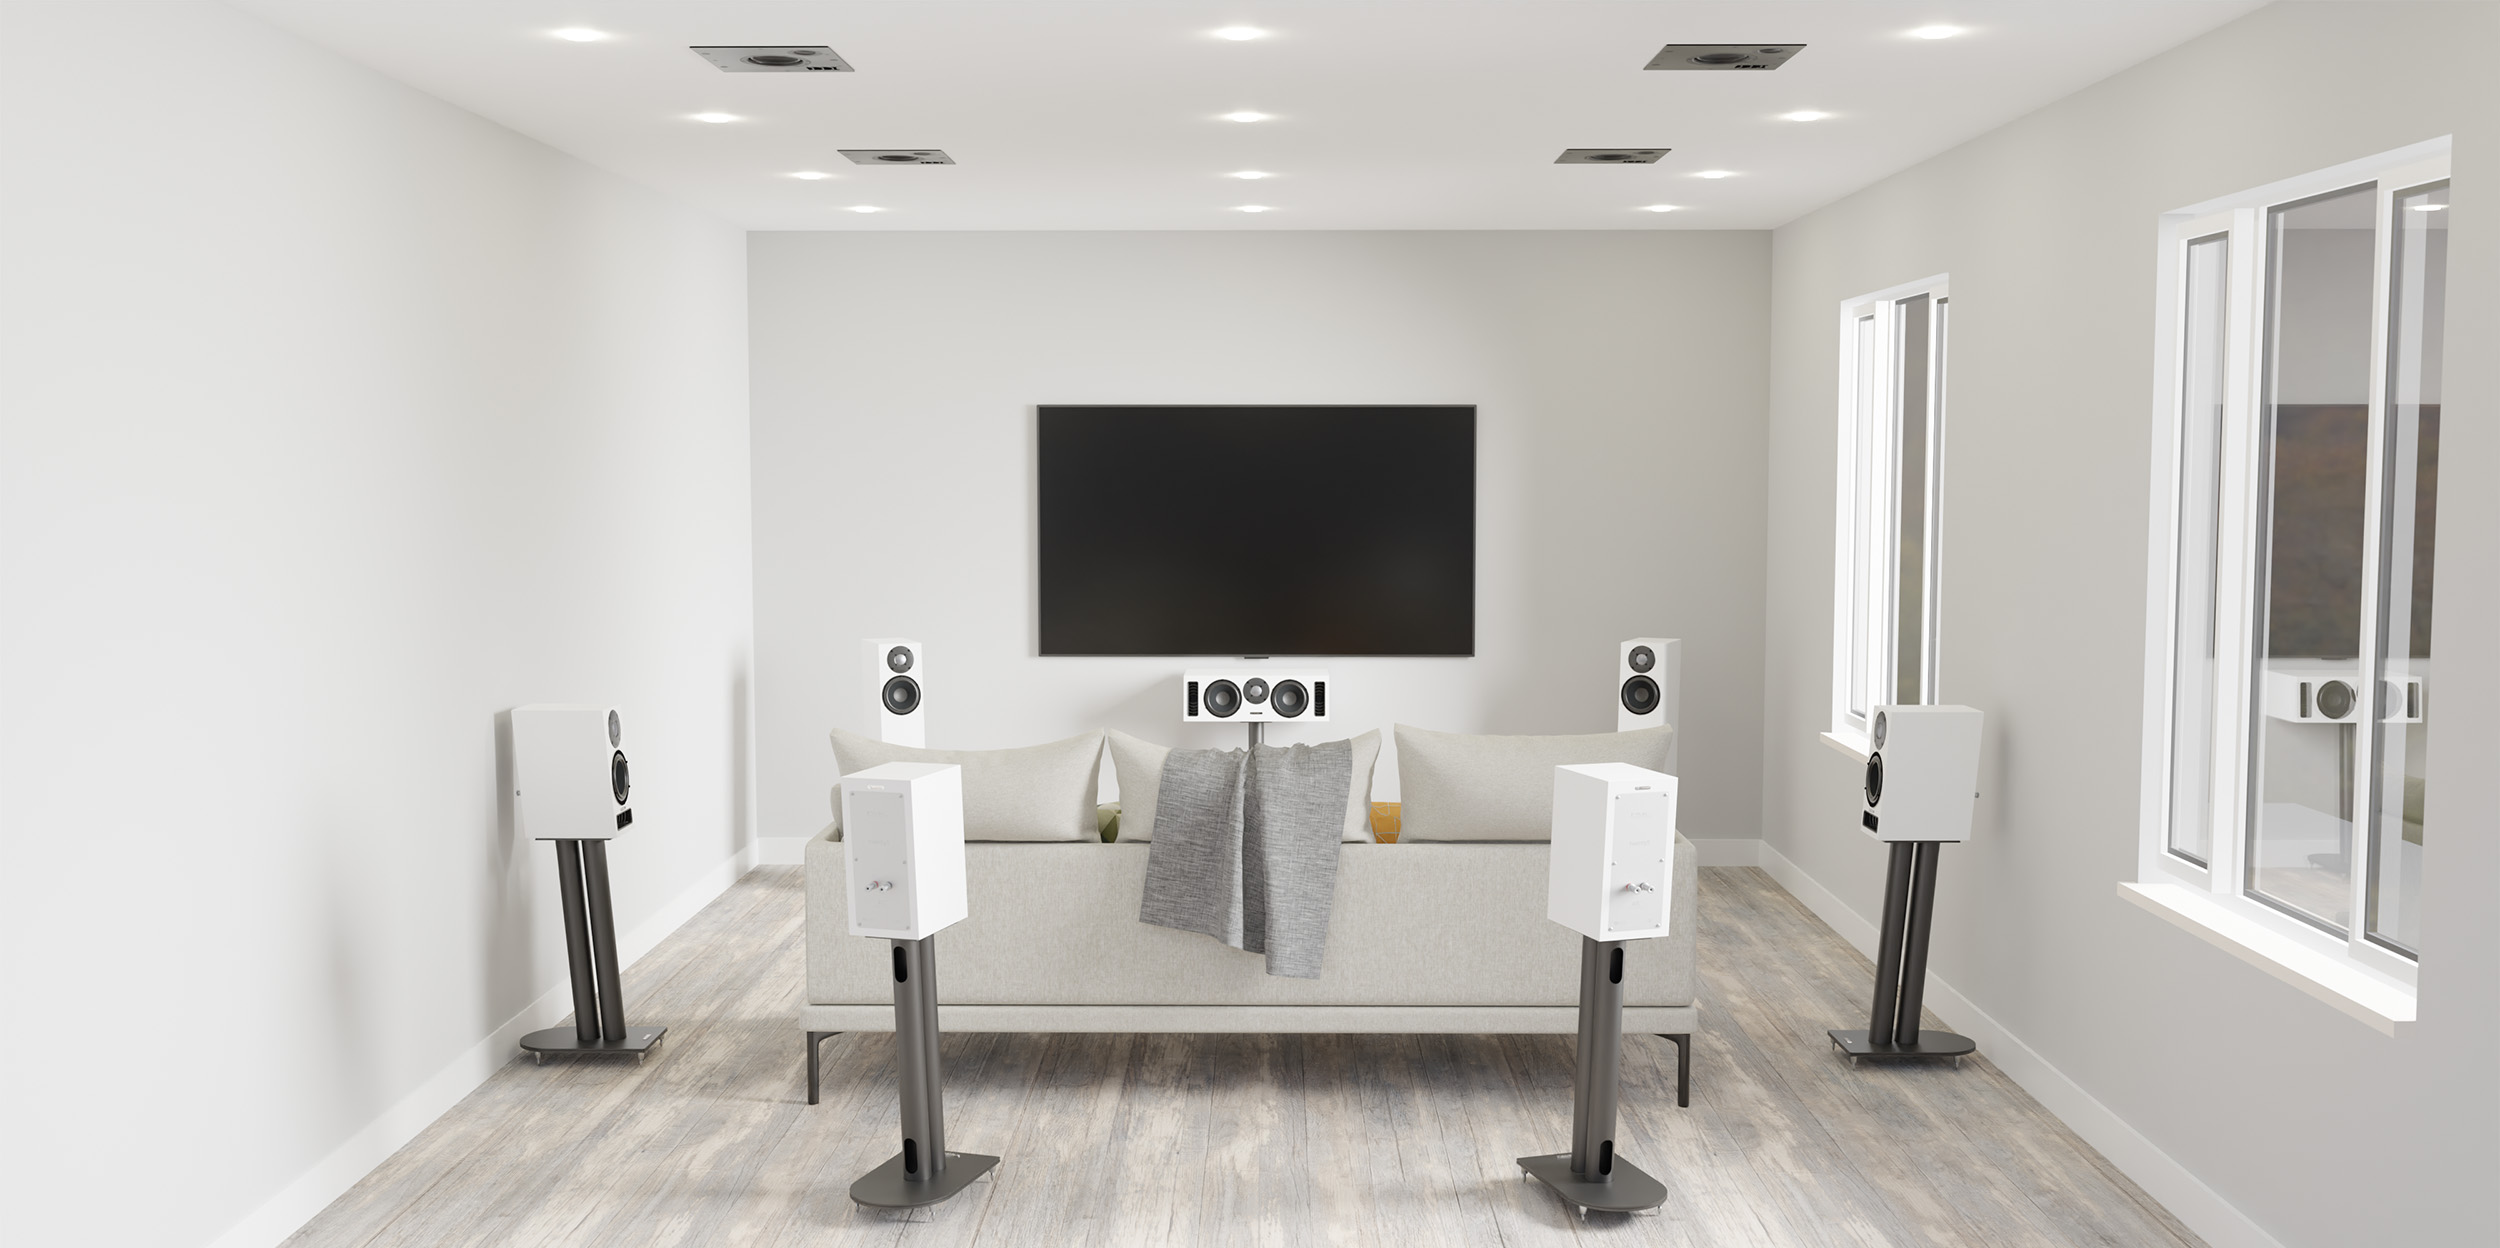 How To Build A Dolby Atmos Home Theater